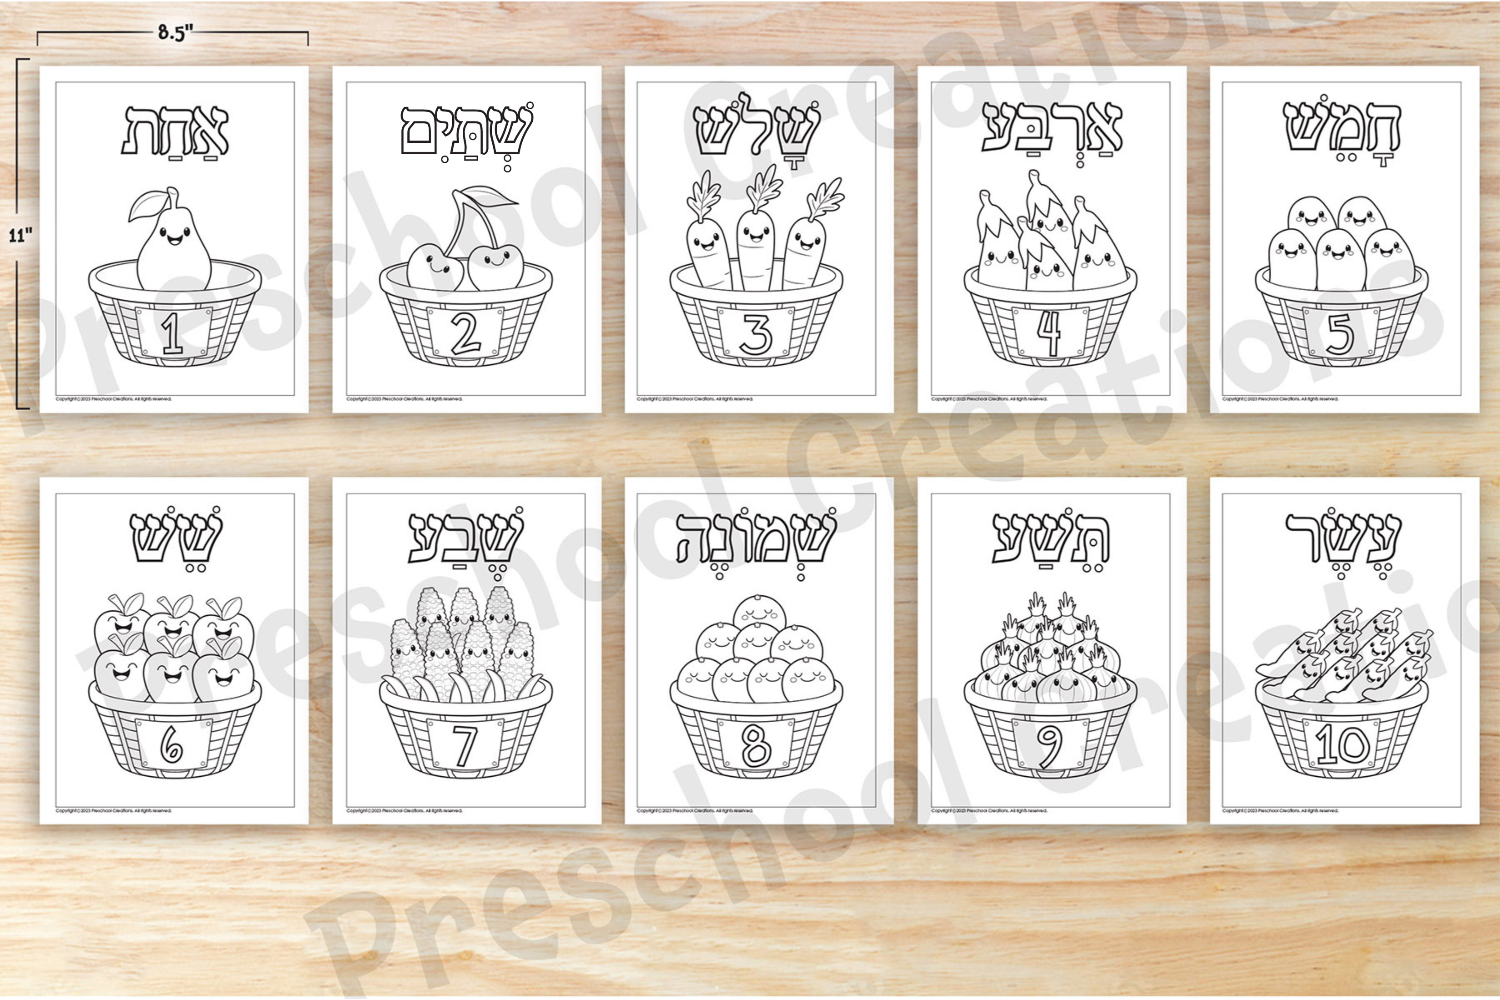 10 black and white coloring pages depicting numbers 1-10 in Hebrew.  Help your children learn Hebrew numbers in a fun and engaging way with our Counting 1-10 coloring pages in Hebrew!   Make learning to count in Hebrew fun for your kids with this set of 10 coloring pages featuring numbers from 1 to 10 written in Hebrew. Let their imaginations take over as they learn a new language while embracing their creativity. Perfect for home or school!